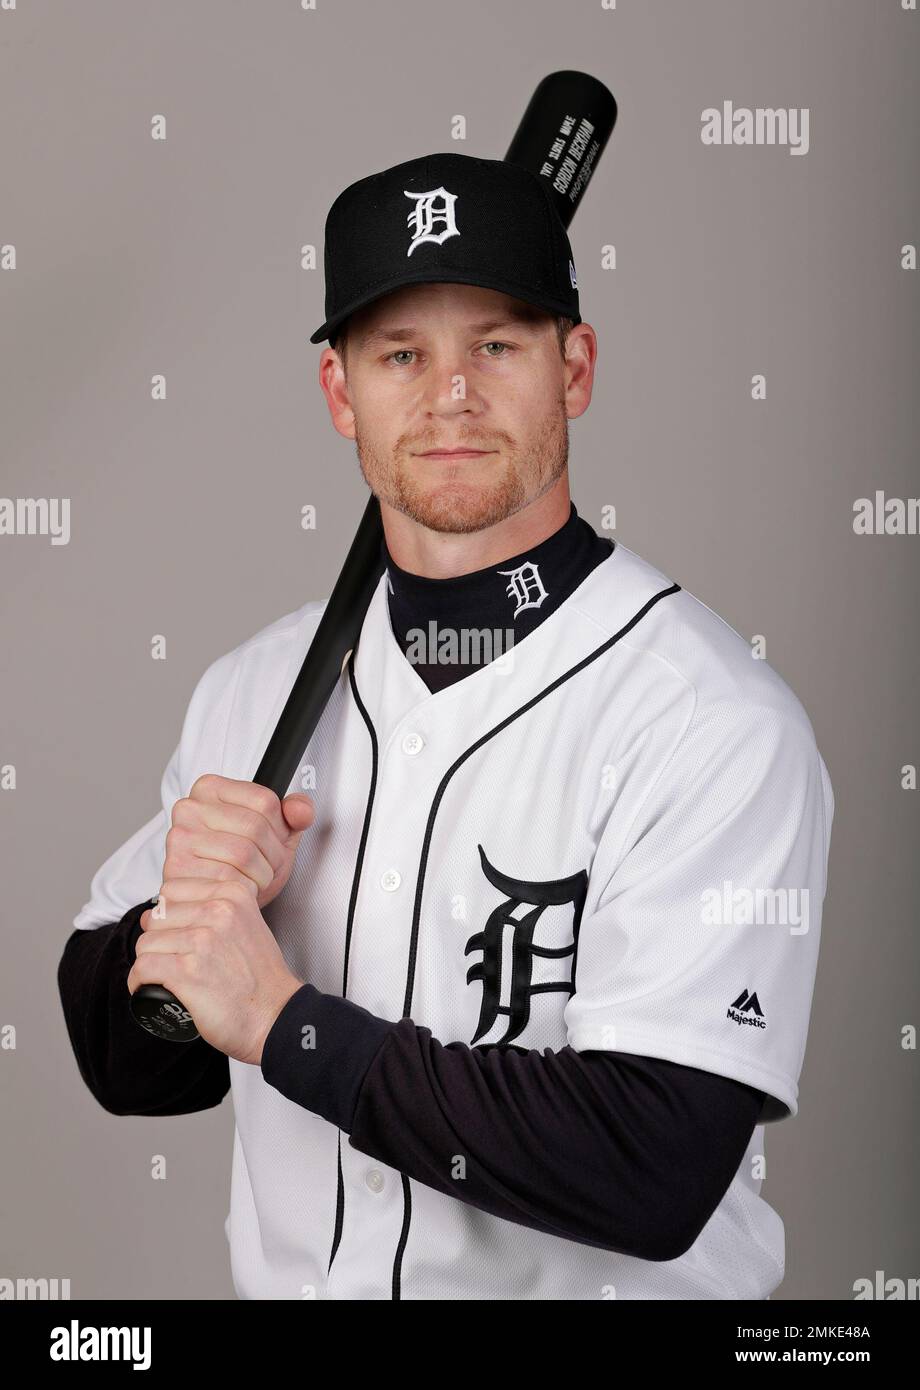 This is a 2019 photo of Gordon Beckham of the Detroit Tigers